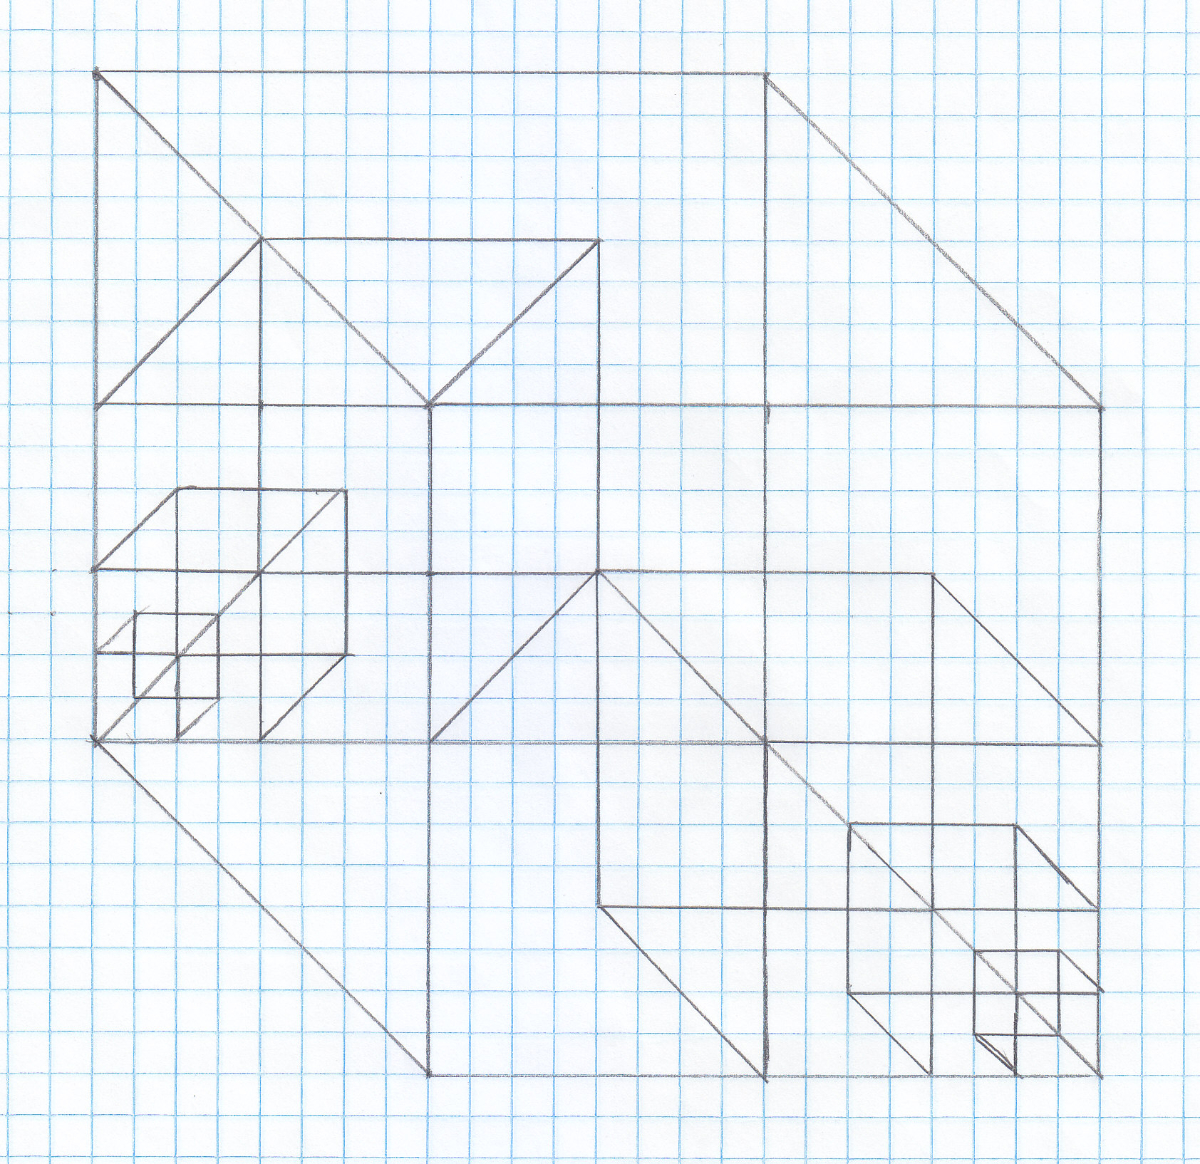 a big cube with many small cubes of shrinking size nested inside it within the top left and bottom right corner